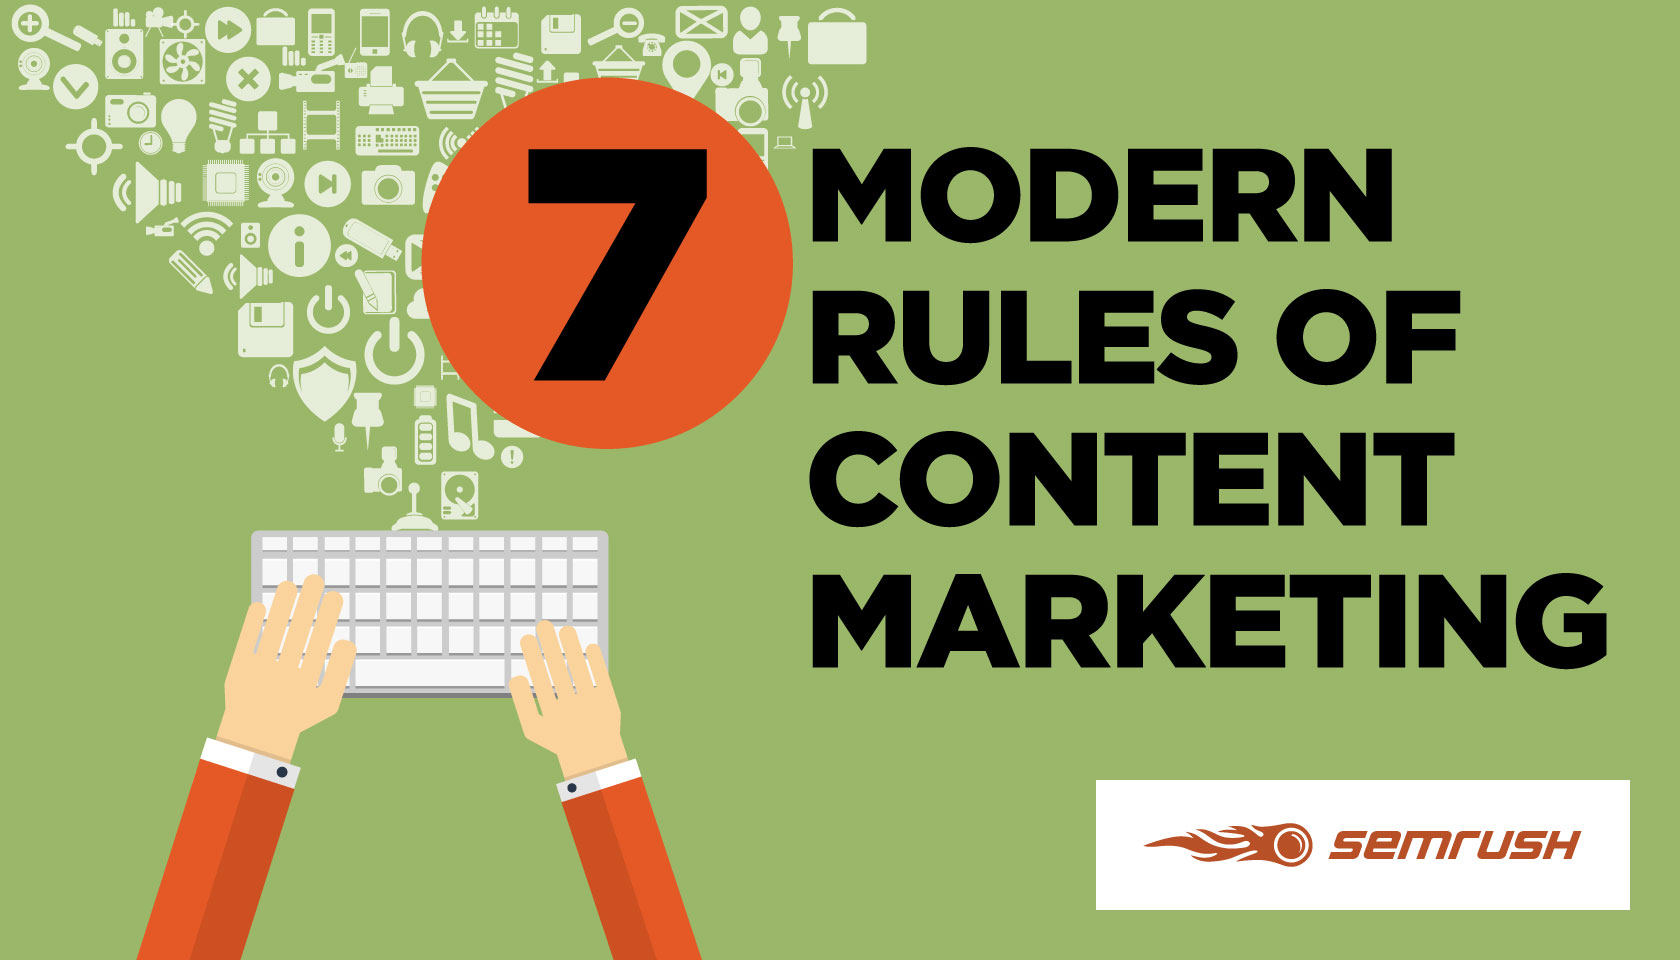 7 Modern Rules of Content Marketing